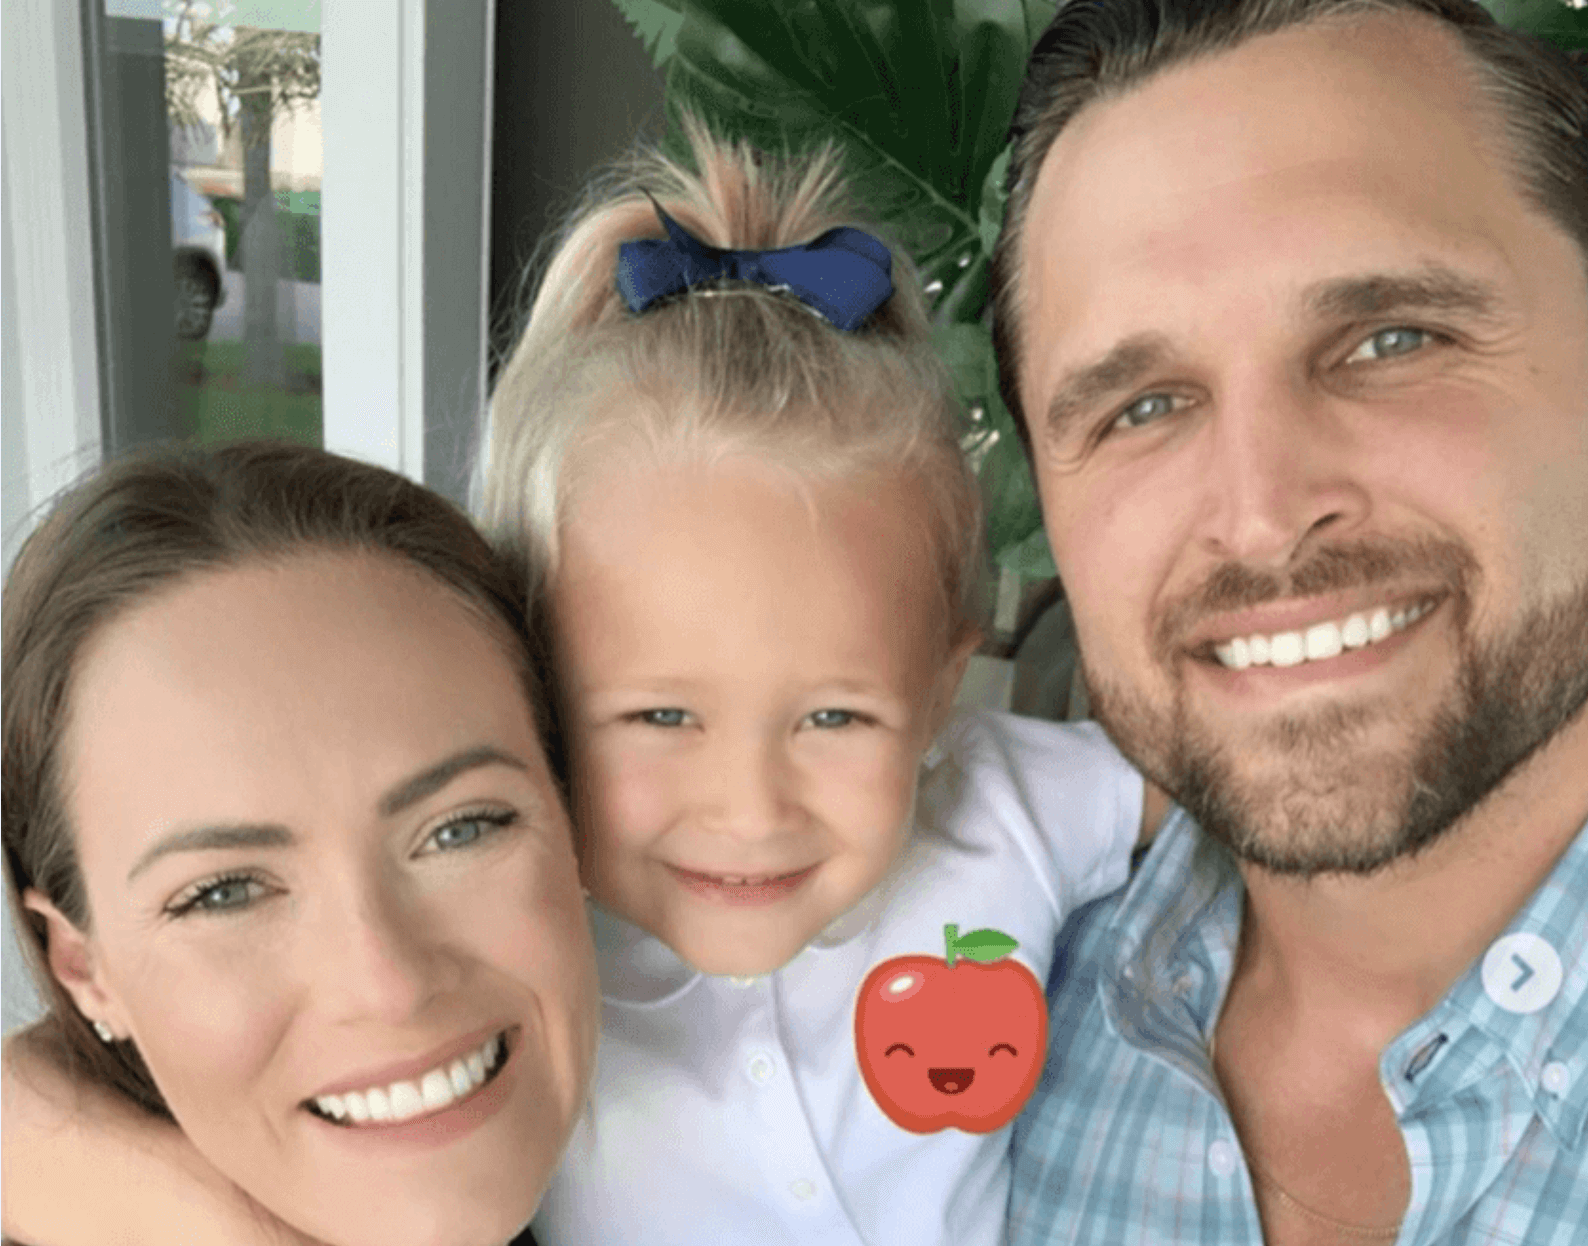 Kara Keough Bosworth’s Infant Son Dies Shortly After a Difficult Labor & Delivery